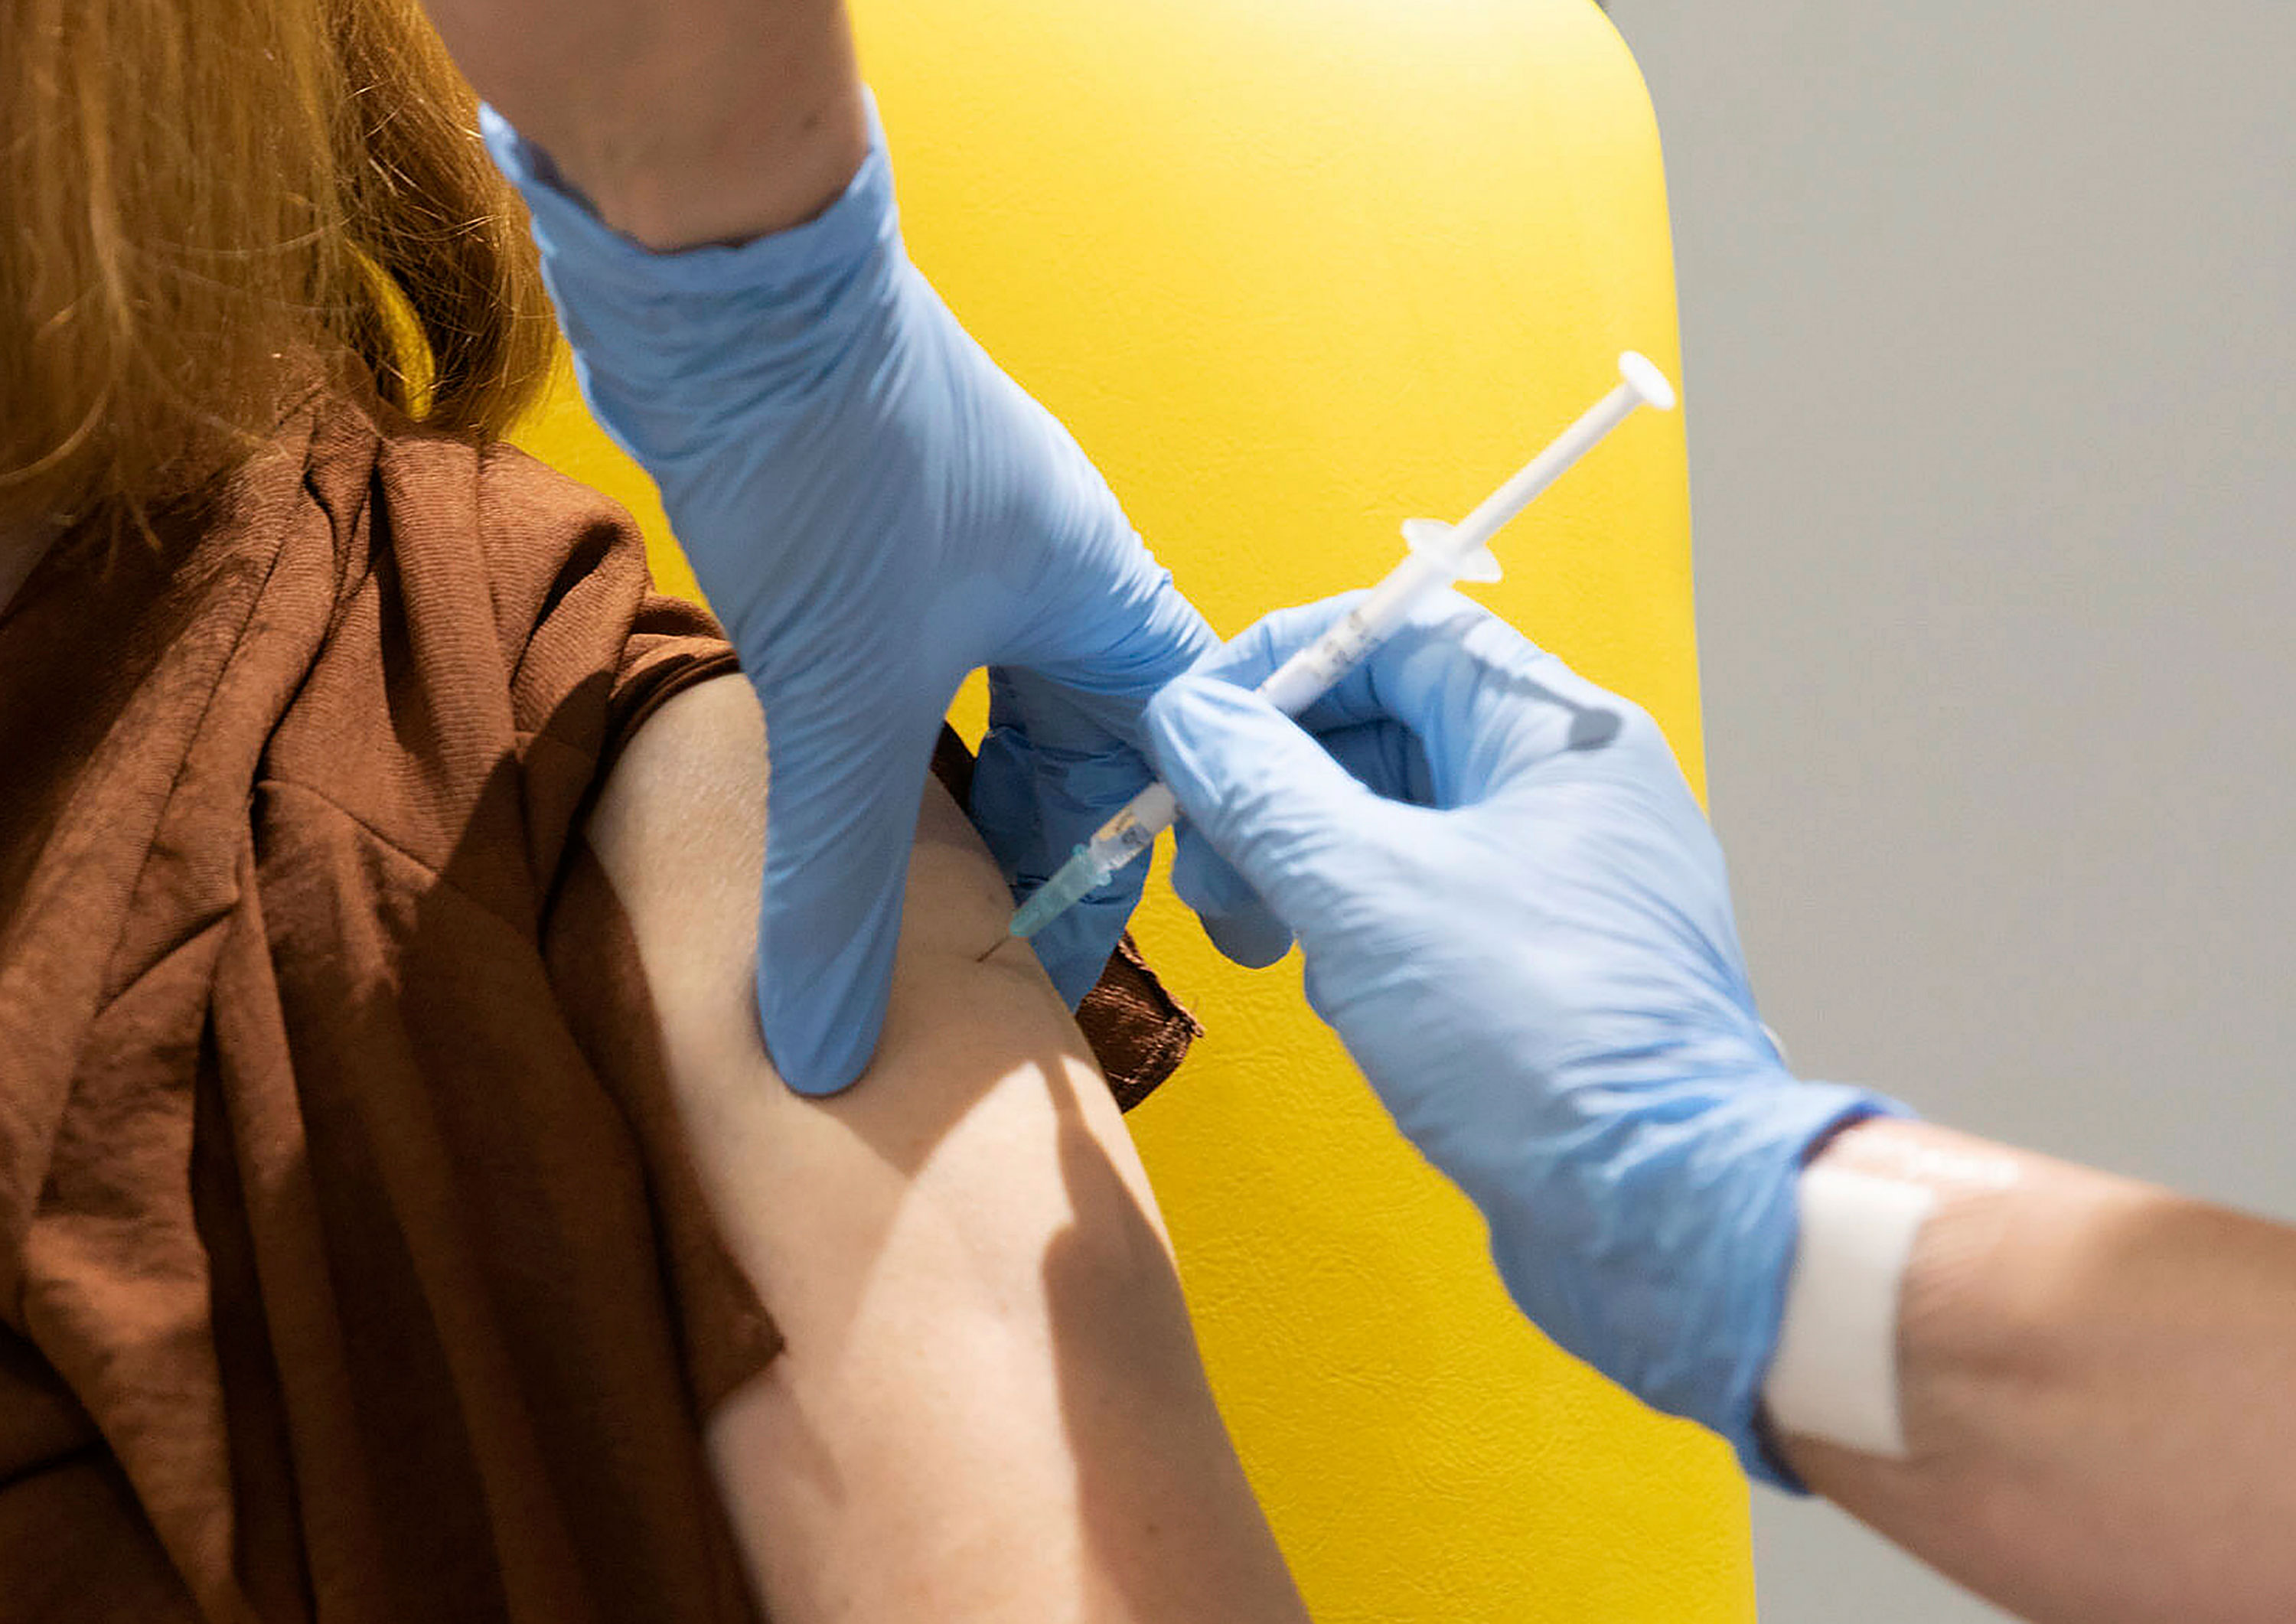 A trial volunteer in Oxford, England, is administered a coronavirus vaccine developed by AstraZeneca and Oxford University.